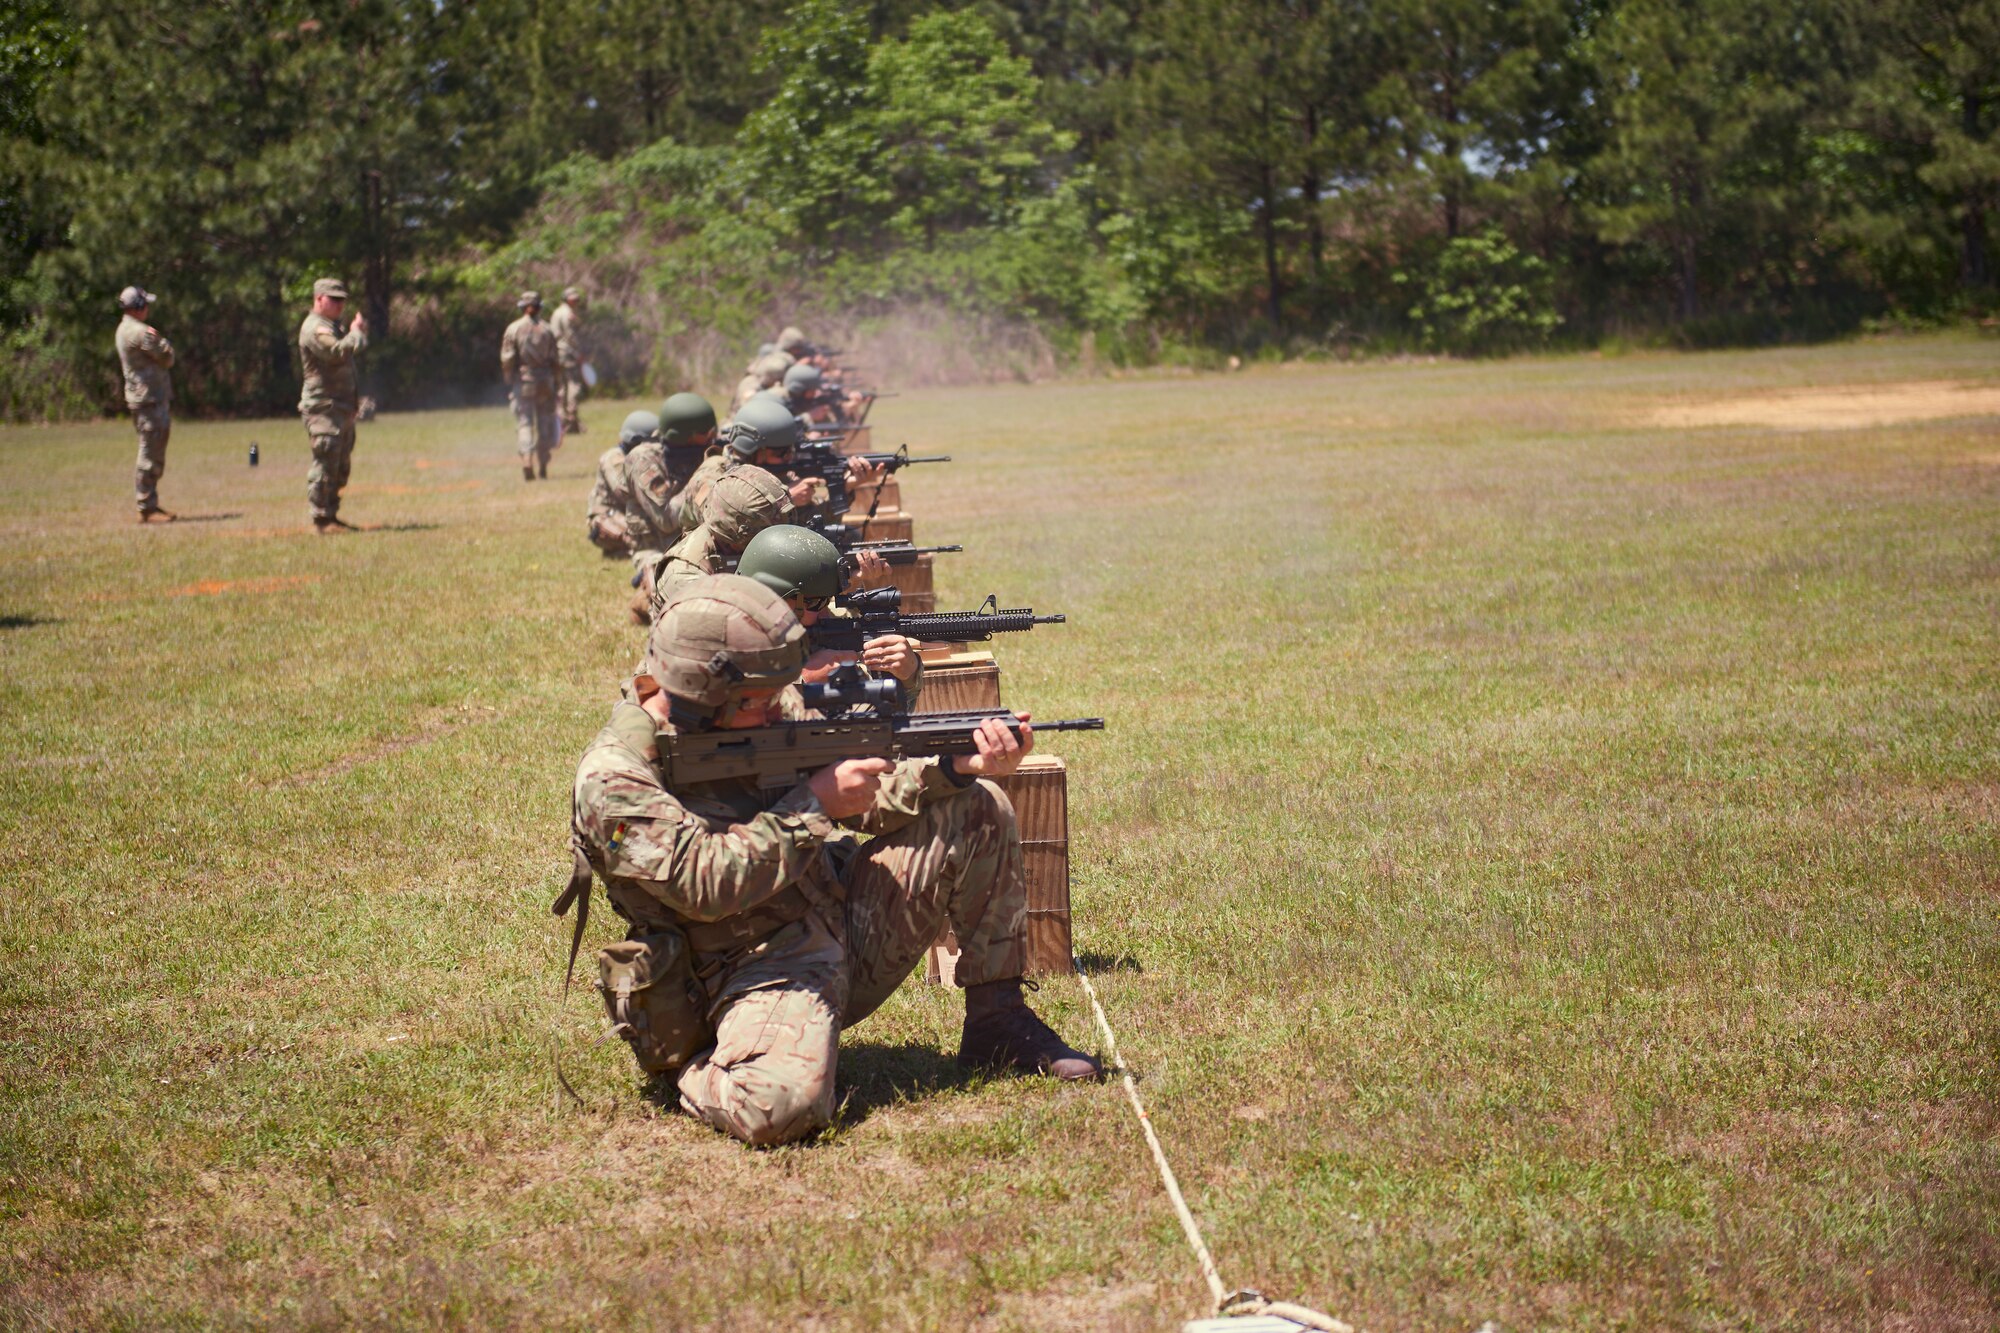 Competitors shoot from the kneeling position during a team event at the Winston P. Wilson competition at Camp Robinson, Arkansas, May 3, 2023.